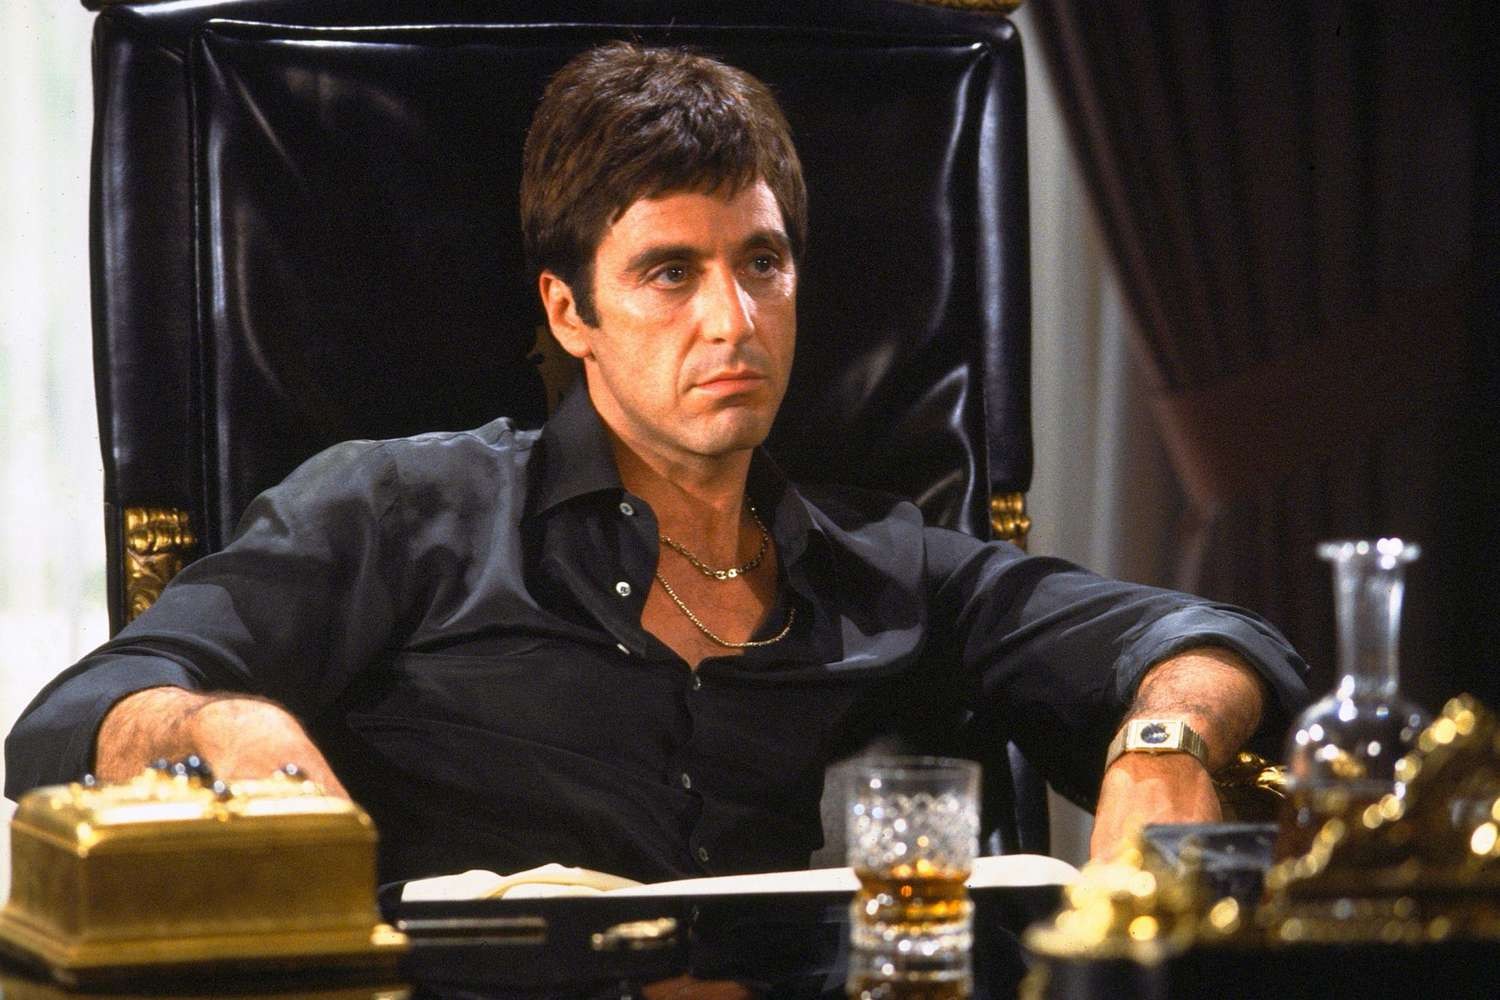 Al Pacino in Scarface